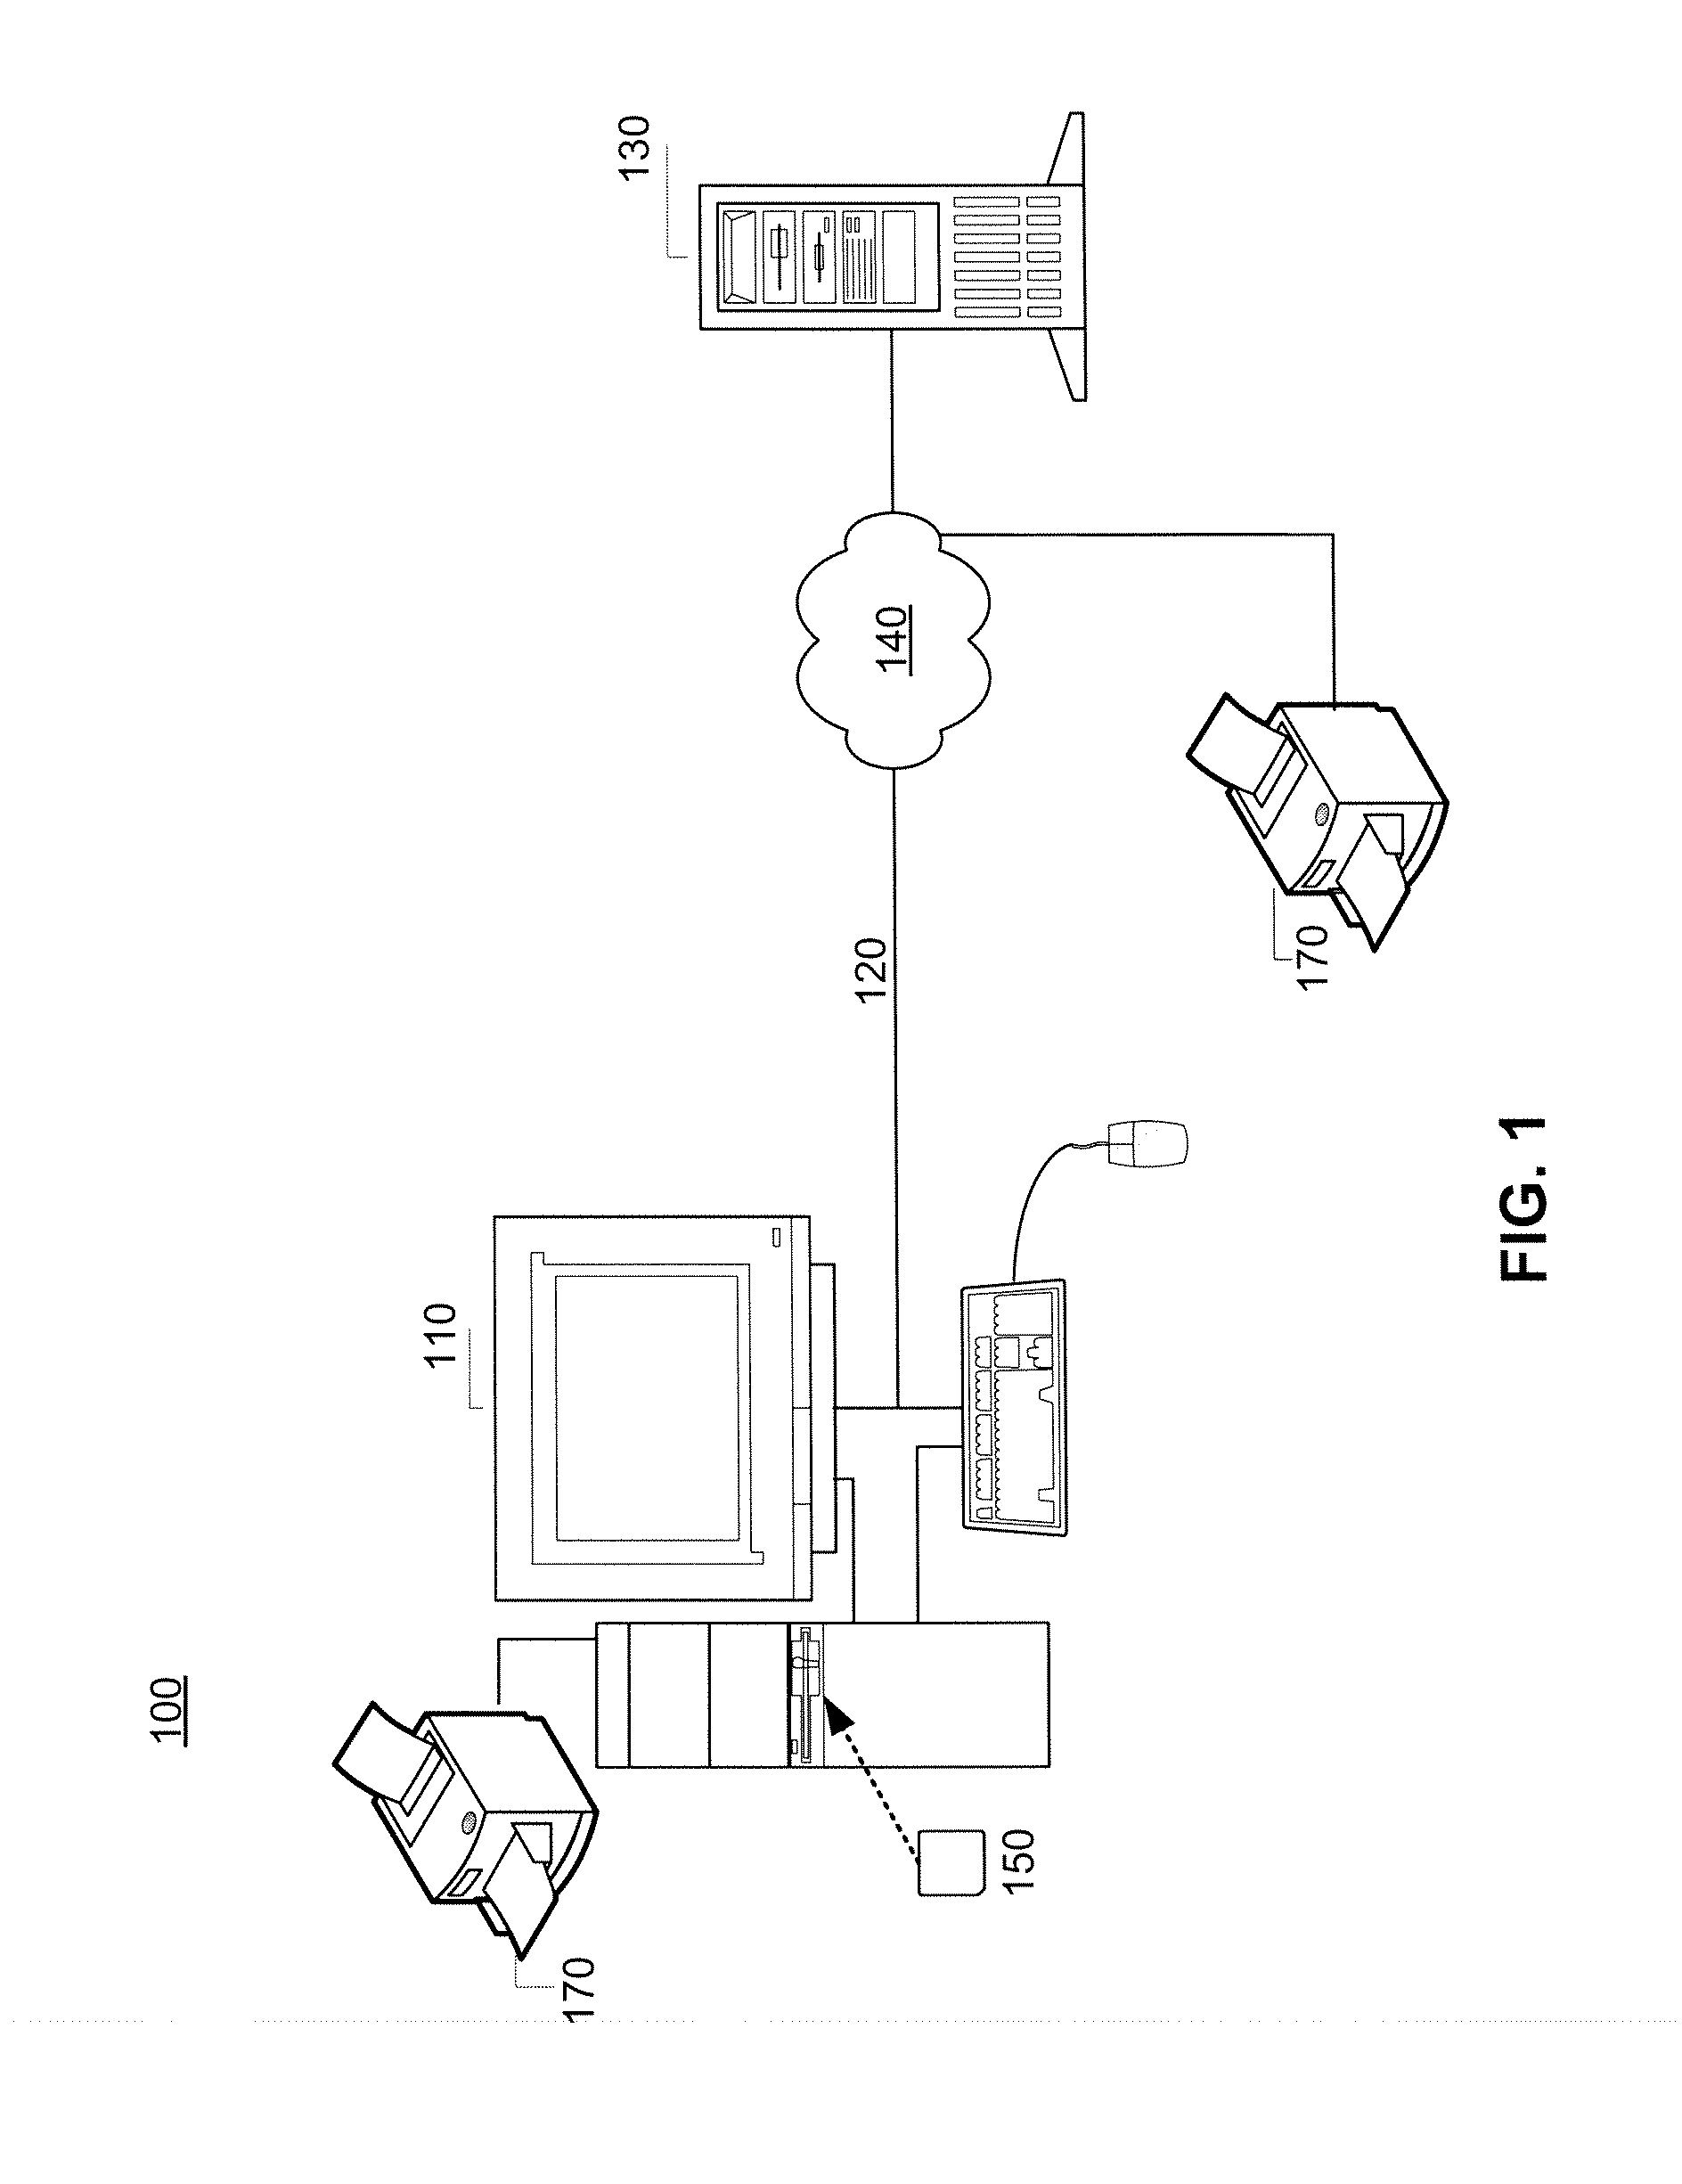 Systems and Methods for Optimized Printer Throughput in a Multi-Core Environment